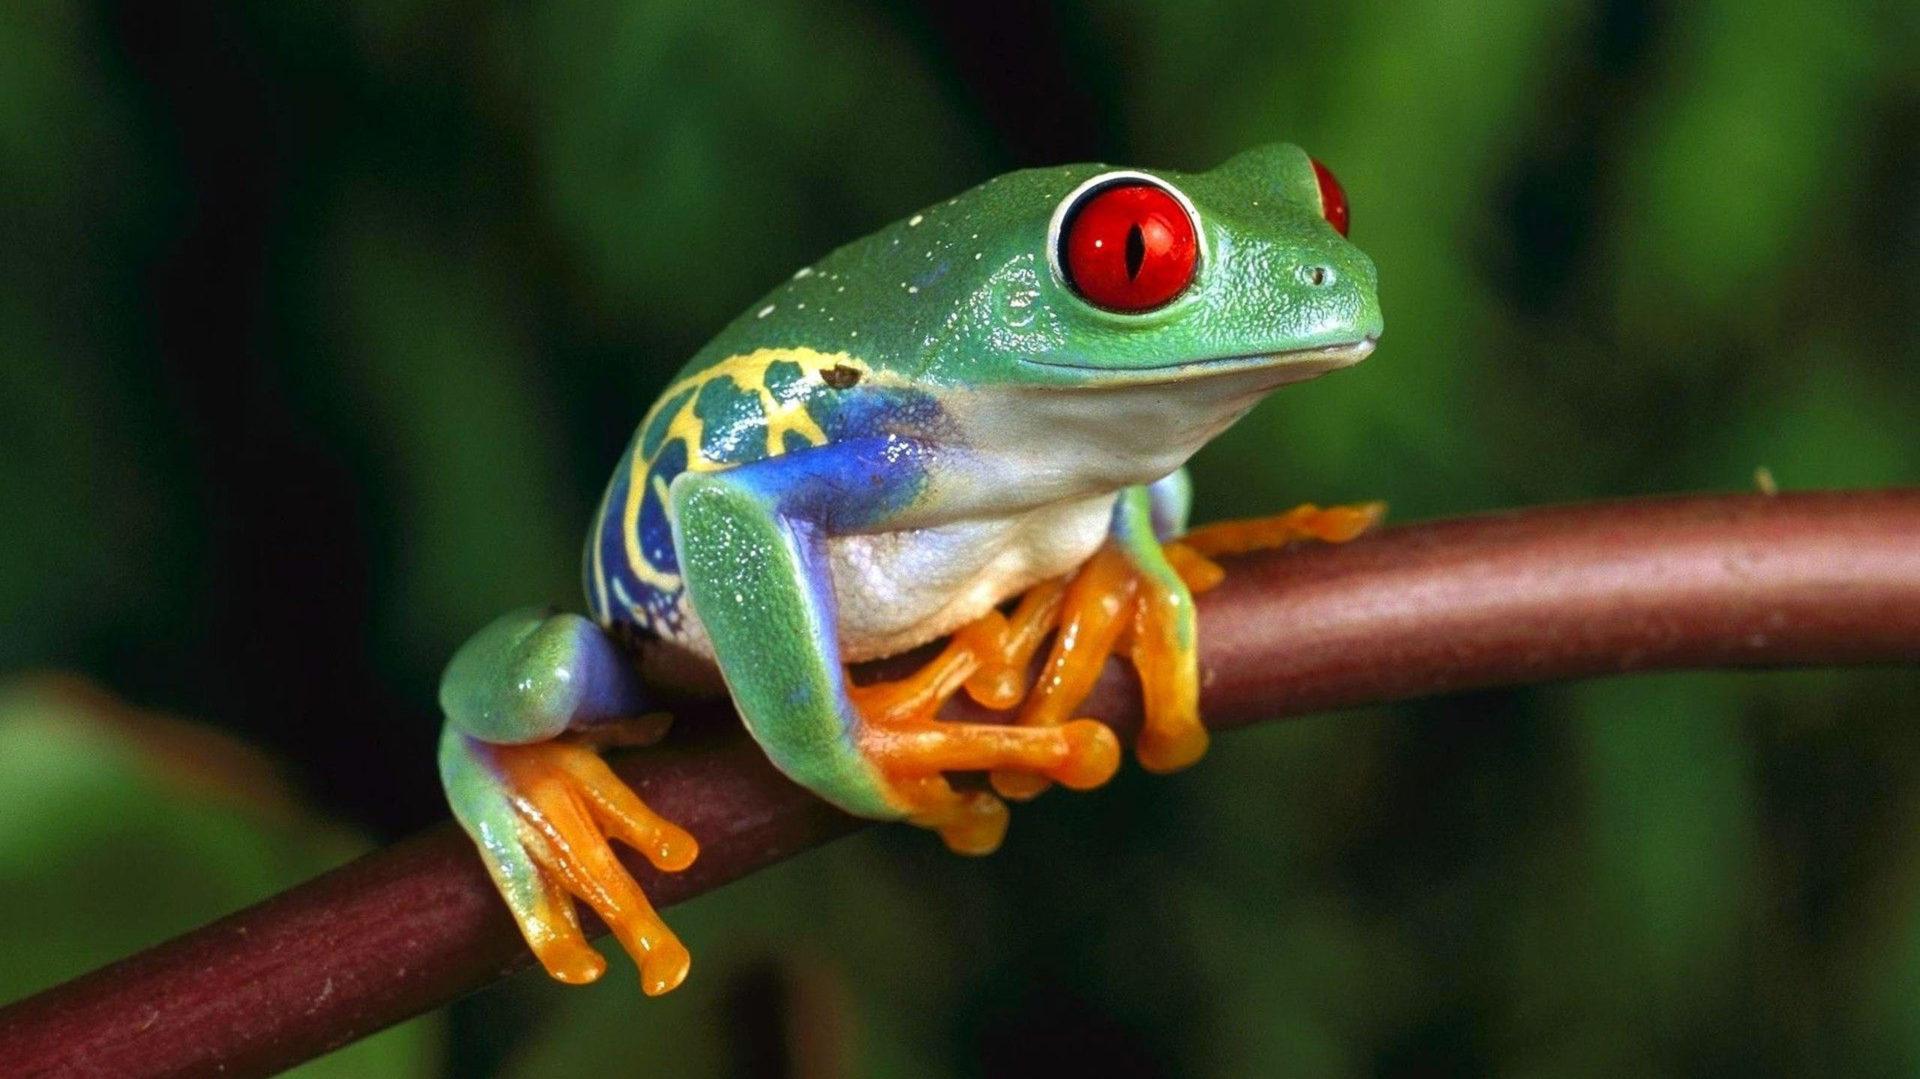 Green Frog With Red Eyes 4k Ultra Hd Wallpapers For Computer   KDE